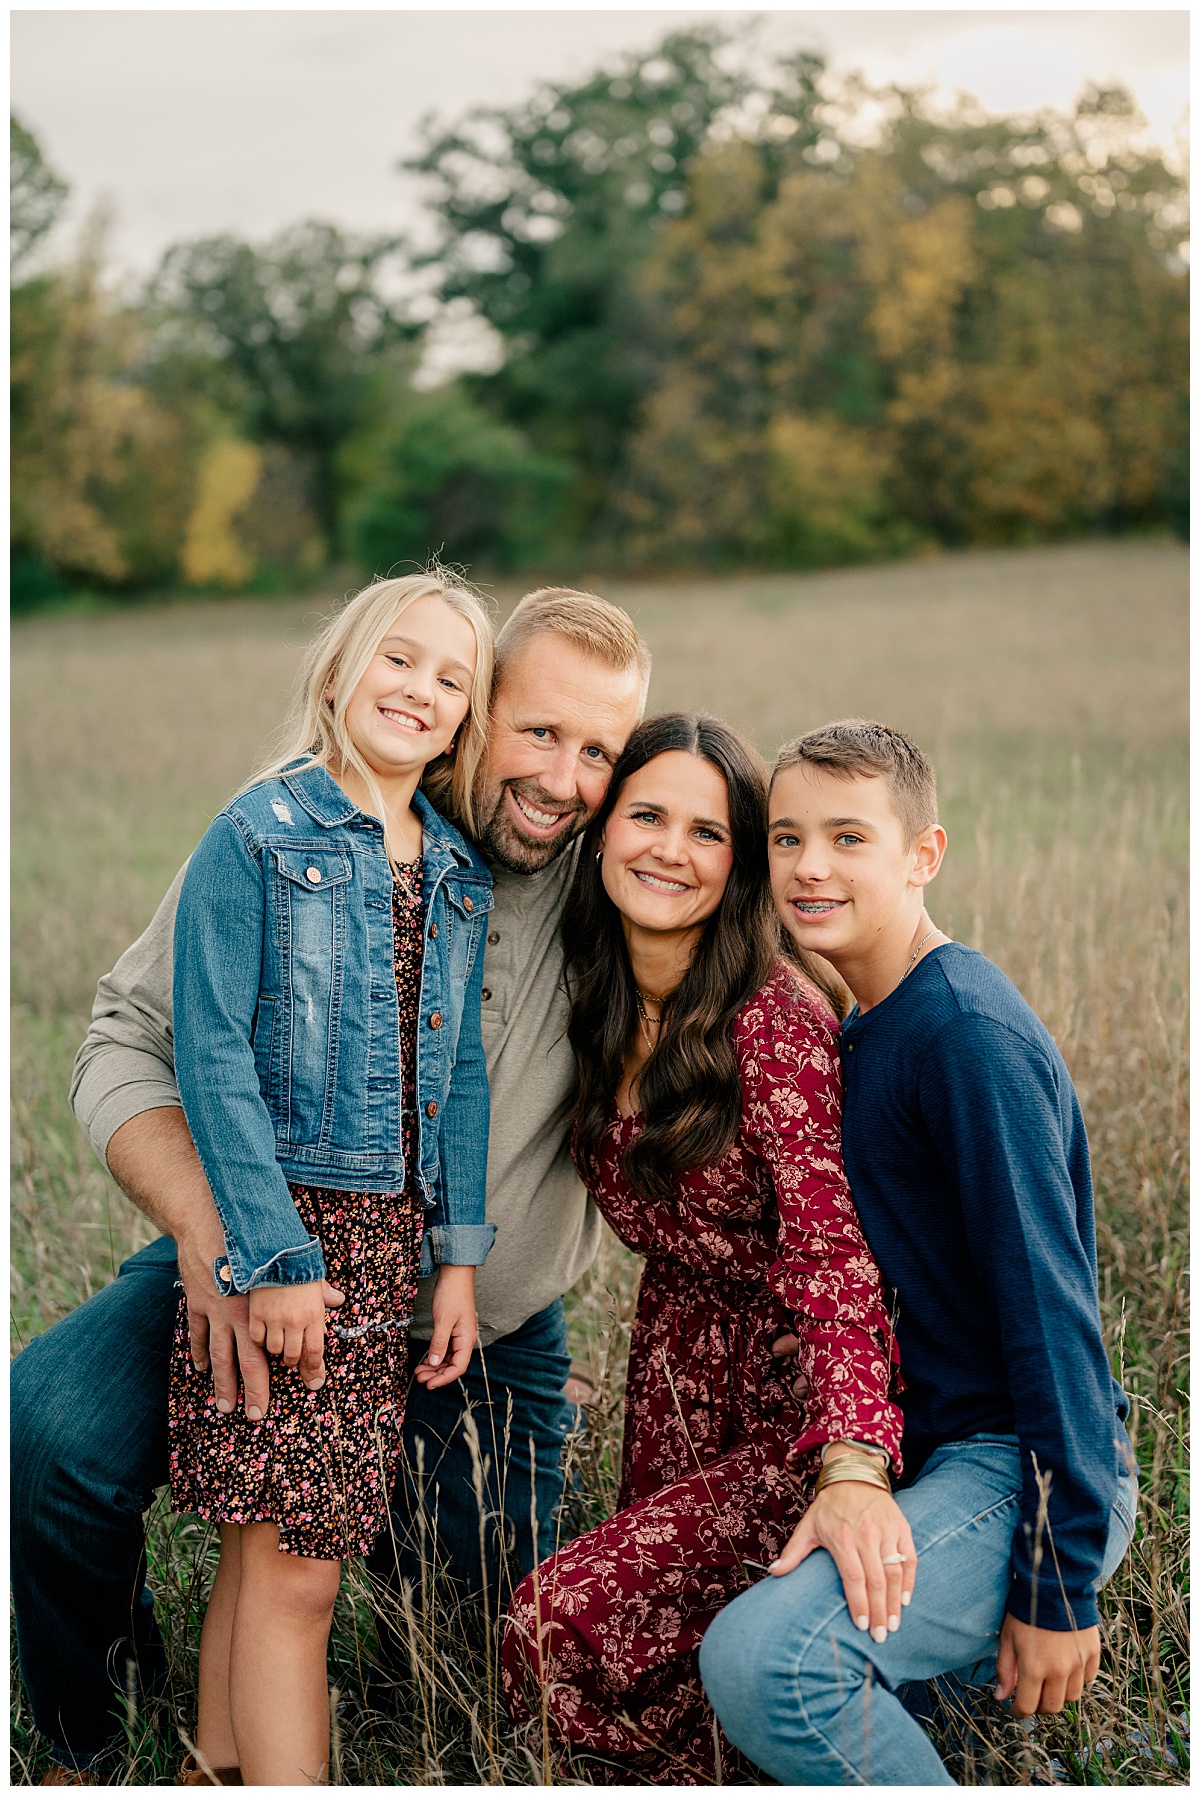 family gathers close and smiles in field by Minnesota photographer